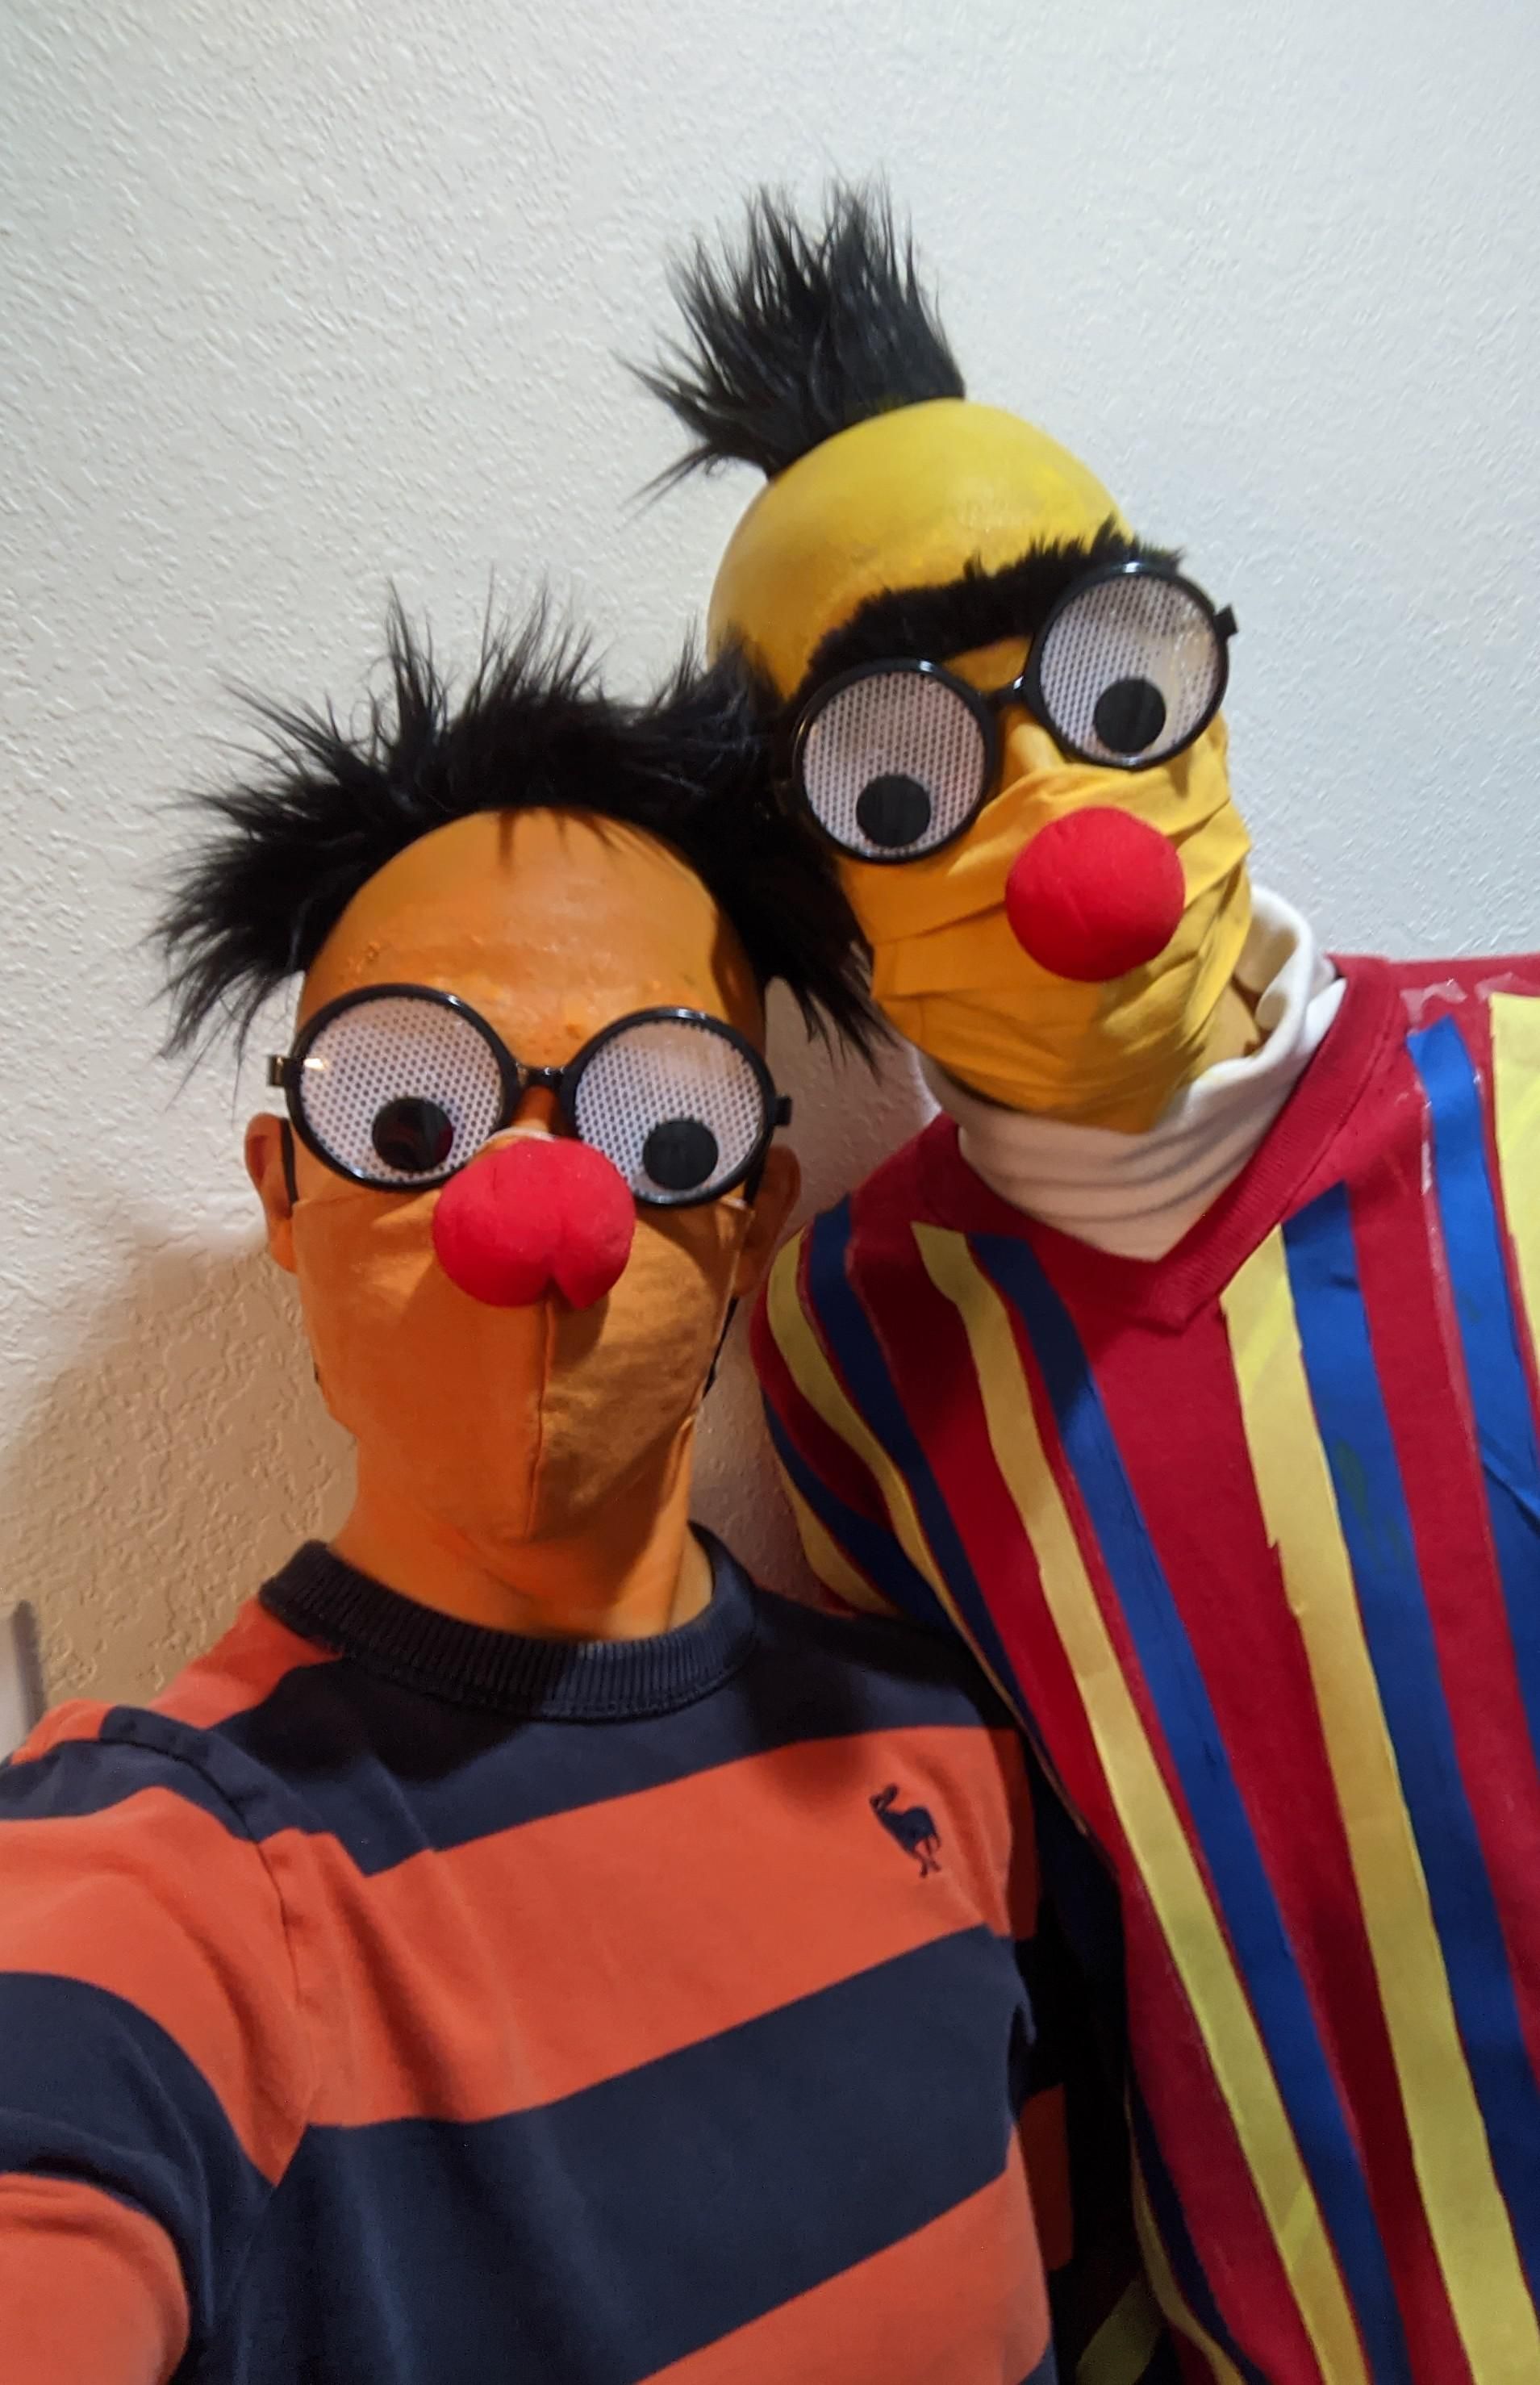 How do I look, Ernie? With your eyes, Bert.